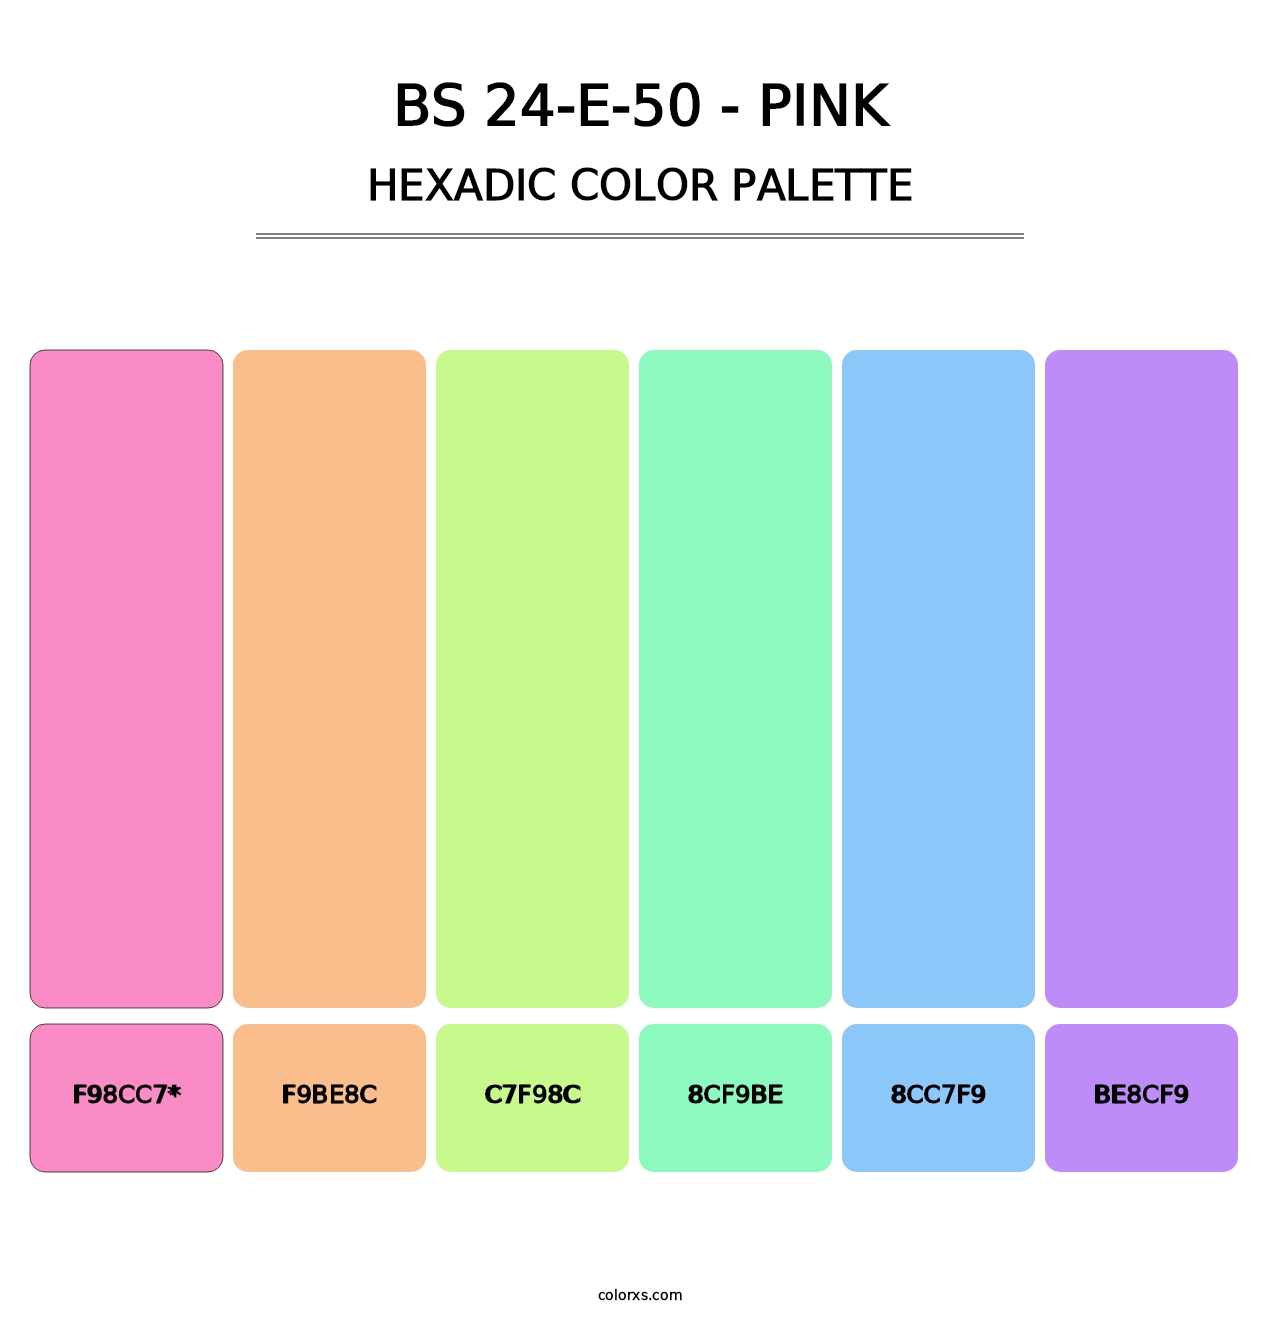 BS 24-E-50 - Pink - Hexadic Color Palette